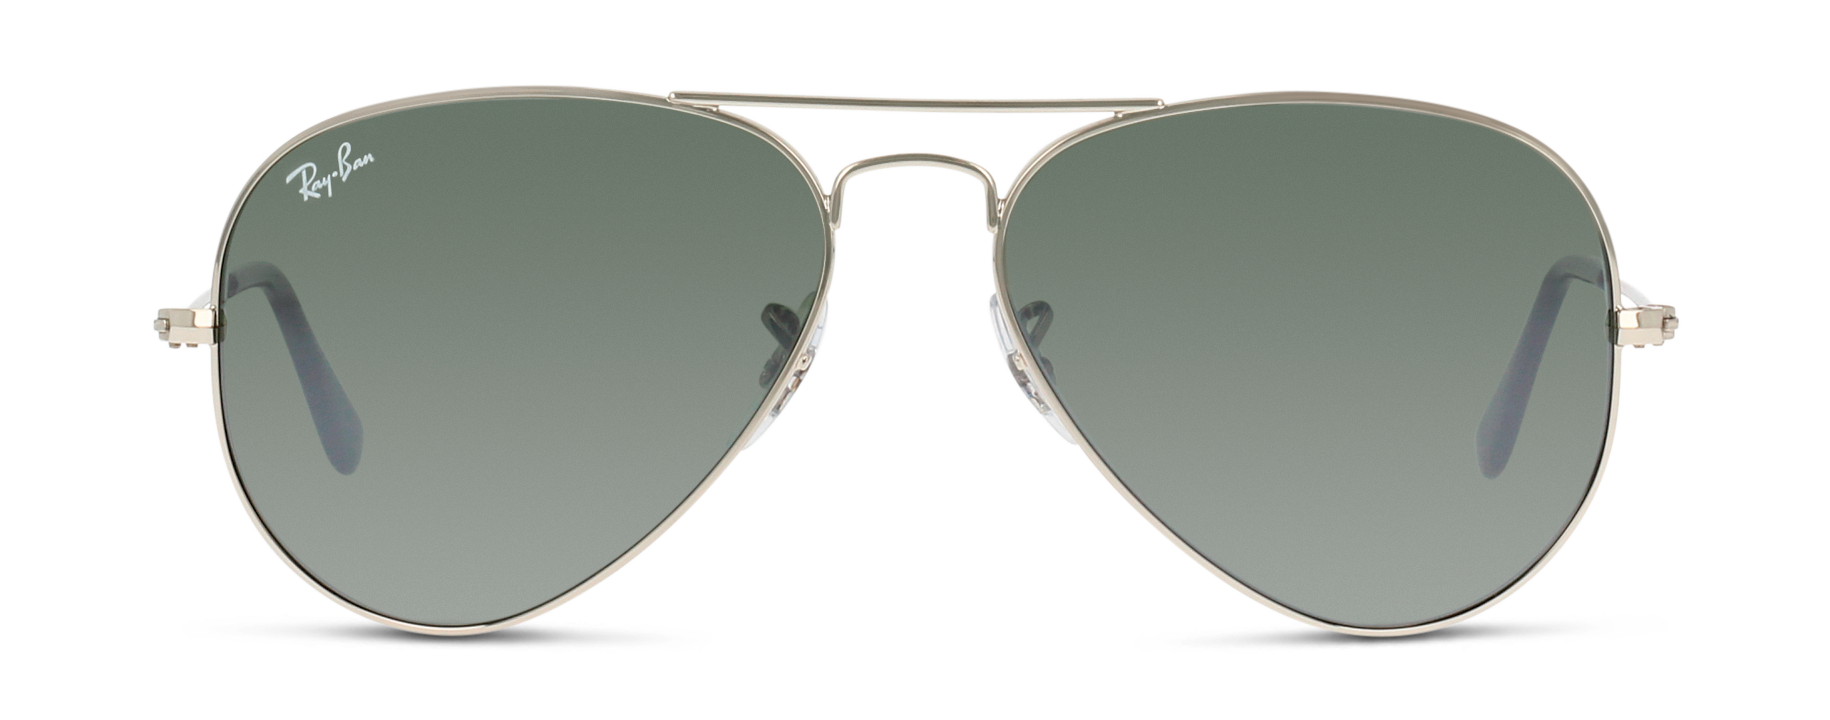 [products.image.front] Ray-Ban Aviator Mirror RB3025 W3275